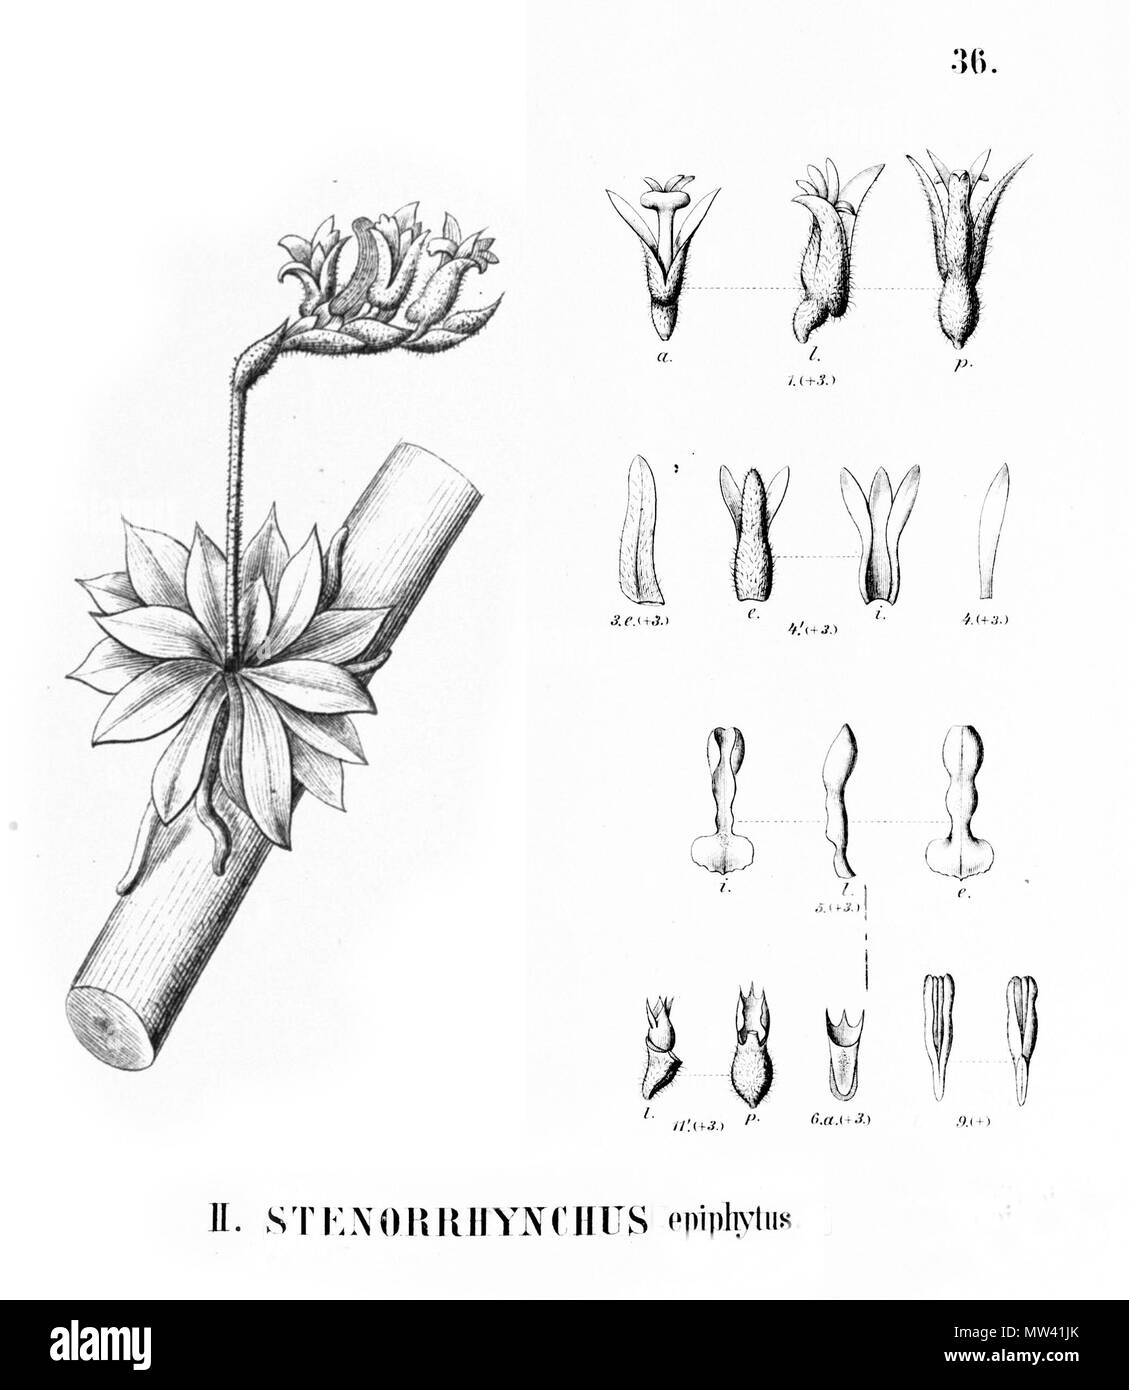 . Illustration of Lankesterella caespitosa (as syn. Stenorrhynchos epiphytum, spelled by Cogniaux as Stenorrhynchus epiphytus) . 1895. Alfred Cogniaux (1841 - 1916) 359 Lankesterella caespitosa (as syn. Stenorrhynchos epiphytum) - cutout from Flora Brasiliensis 3-4-36-fig II Stock Photo